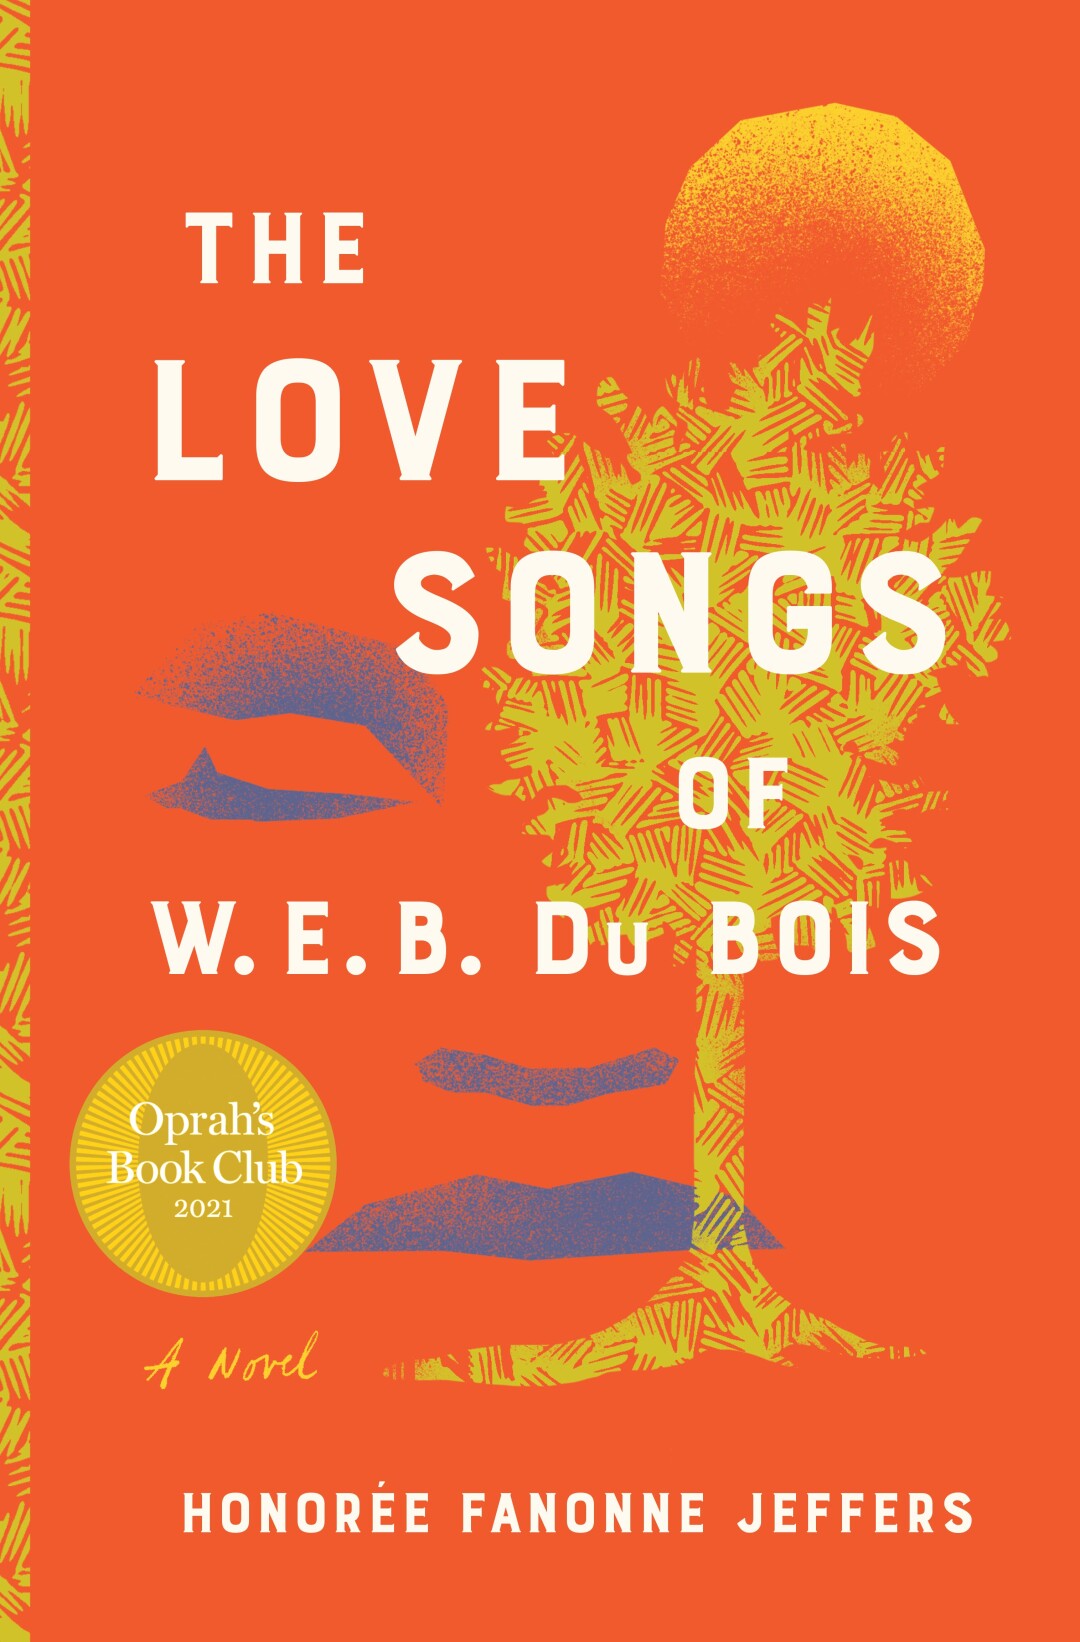 An image of a face and a tree on the cover of "WEB Du Bois Love Songs," by HonorÃ©e Fanonne Jeffers